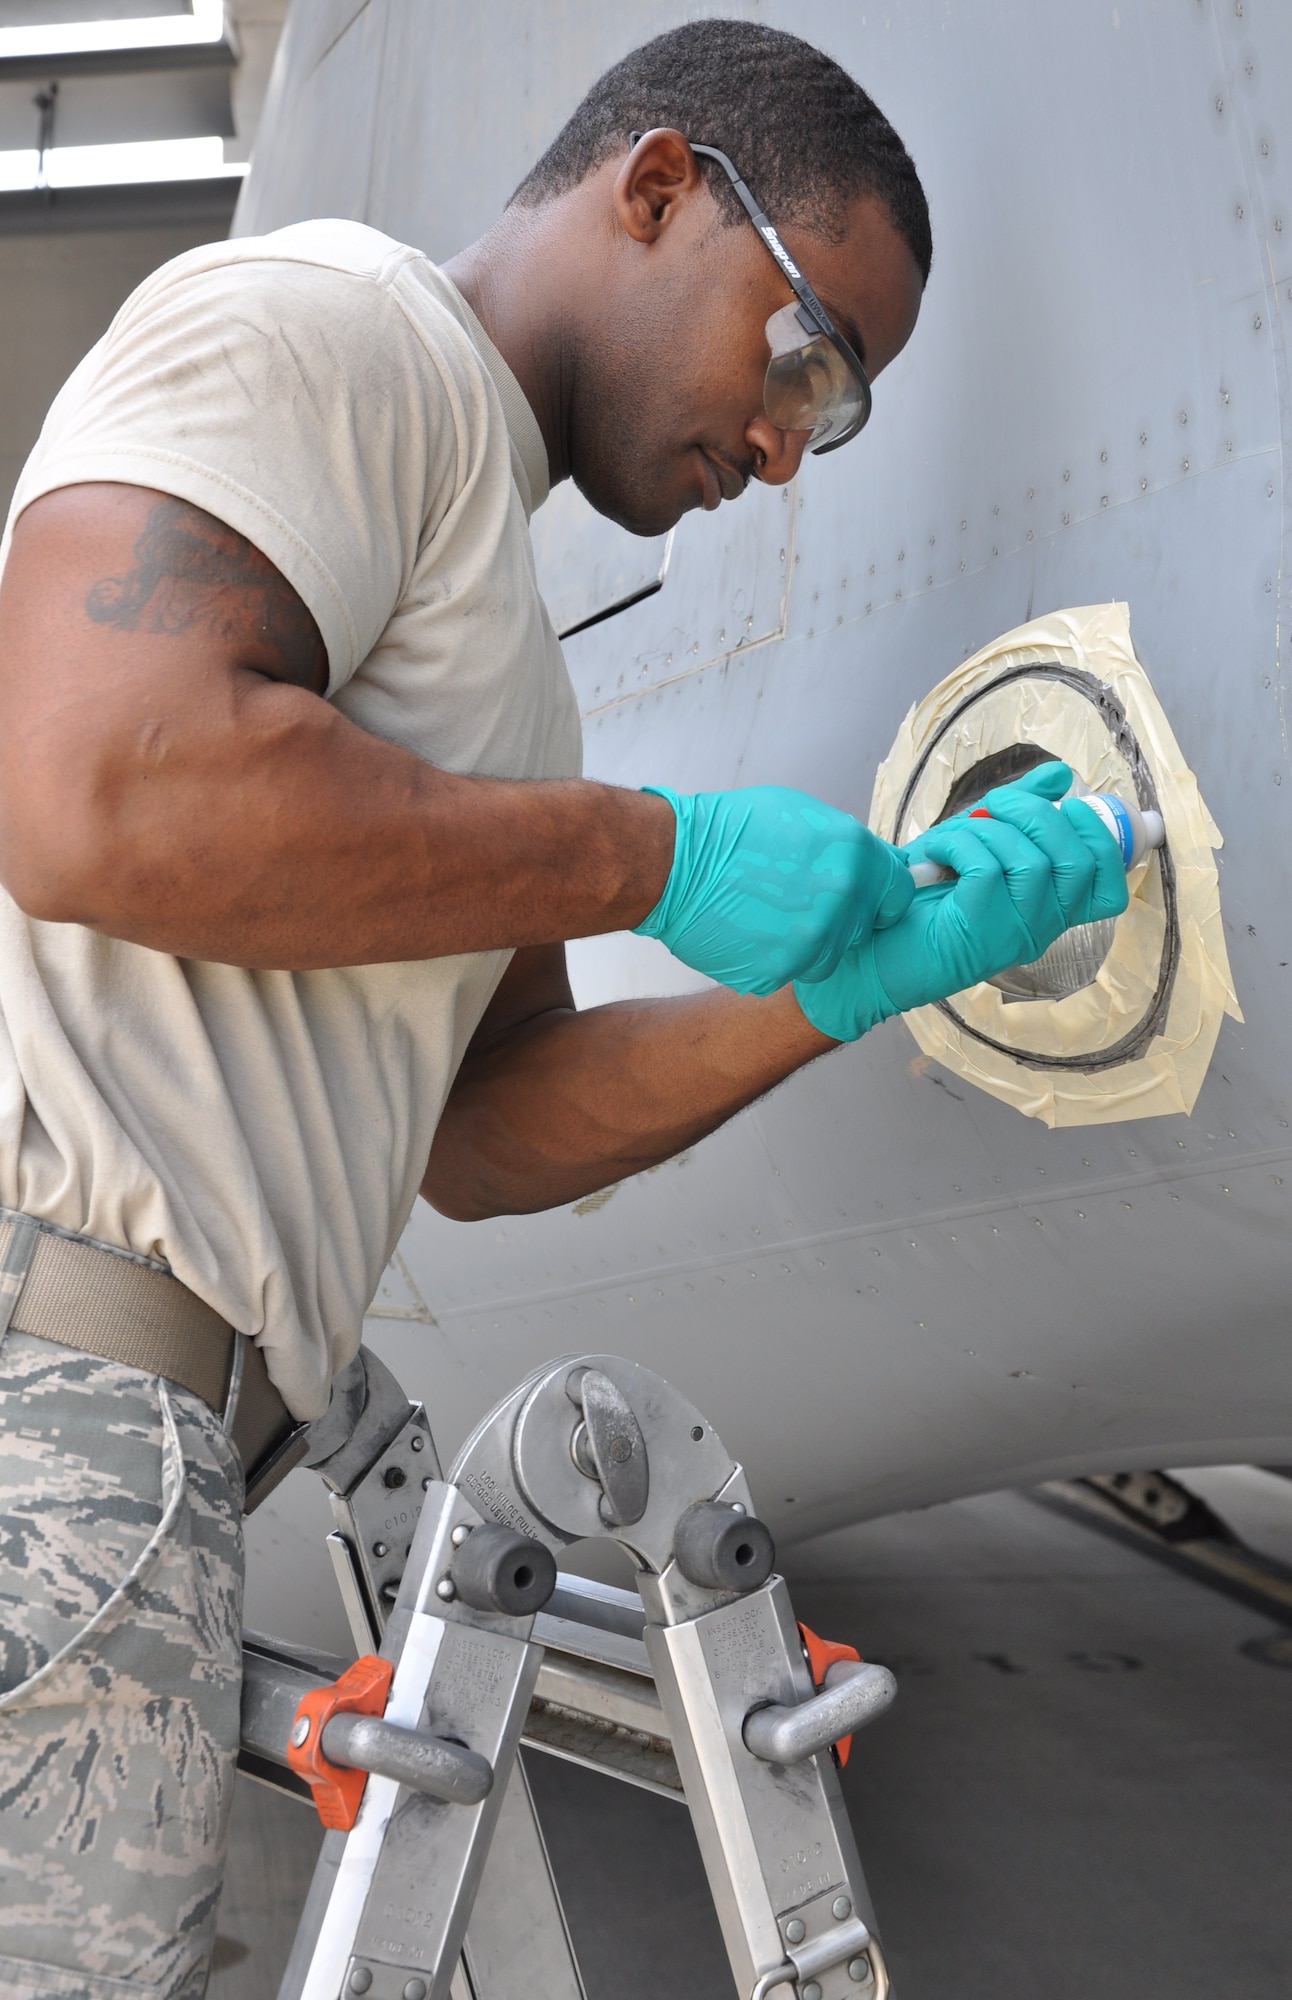 Senior Airman Steven A. Brown seals a taxi light on a C-17 Globemaster III Aug. 3, 2010, at Charleston Air Force Base, S.C. Airman Brown is a crew chief with the 315th Aircraft Maintenance Squadron here. (U.S. Air Force photo/Staff Sgt. Shane Ellis)